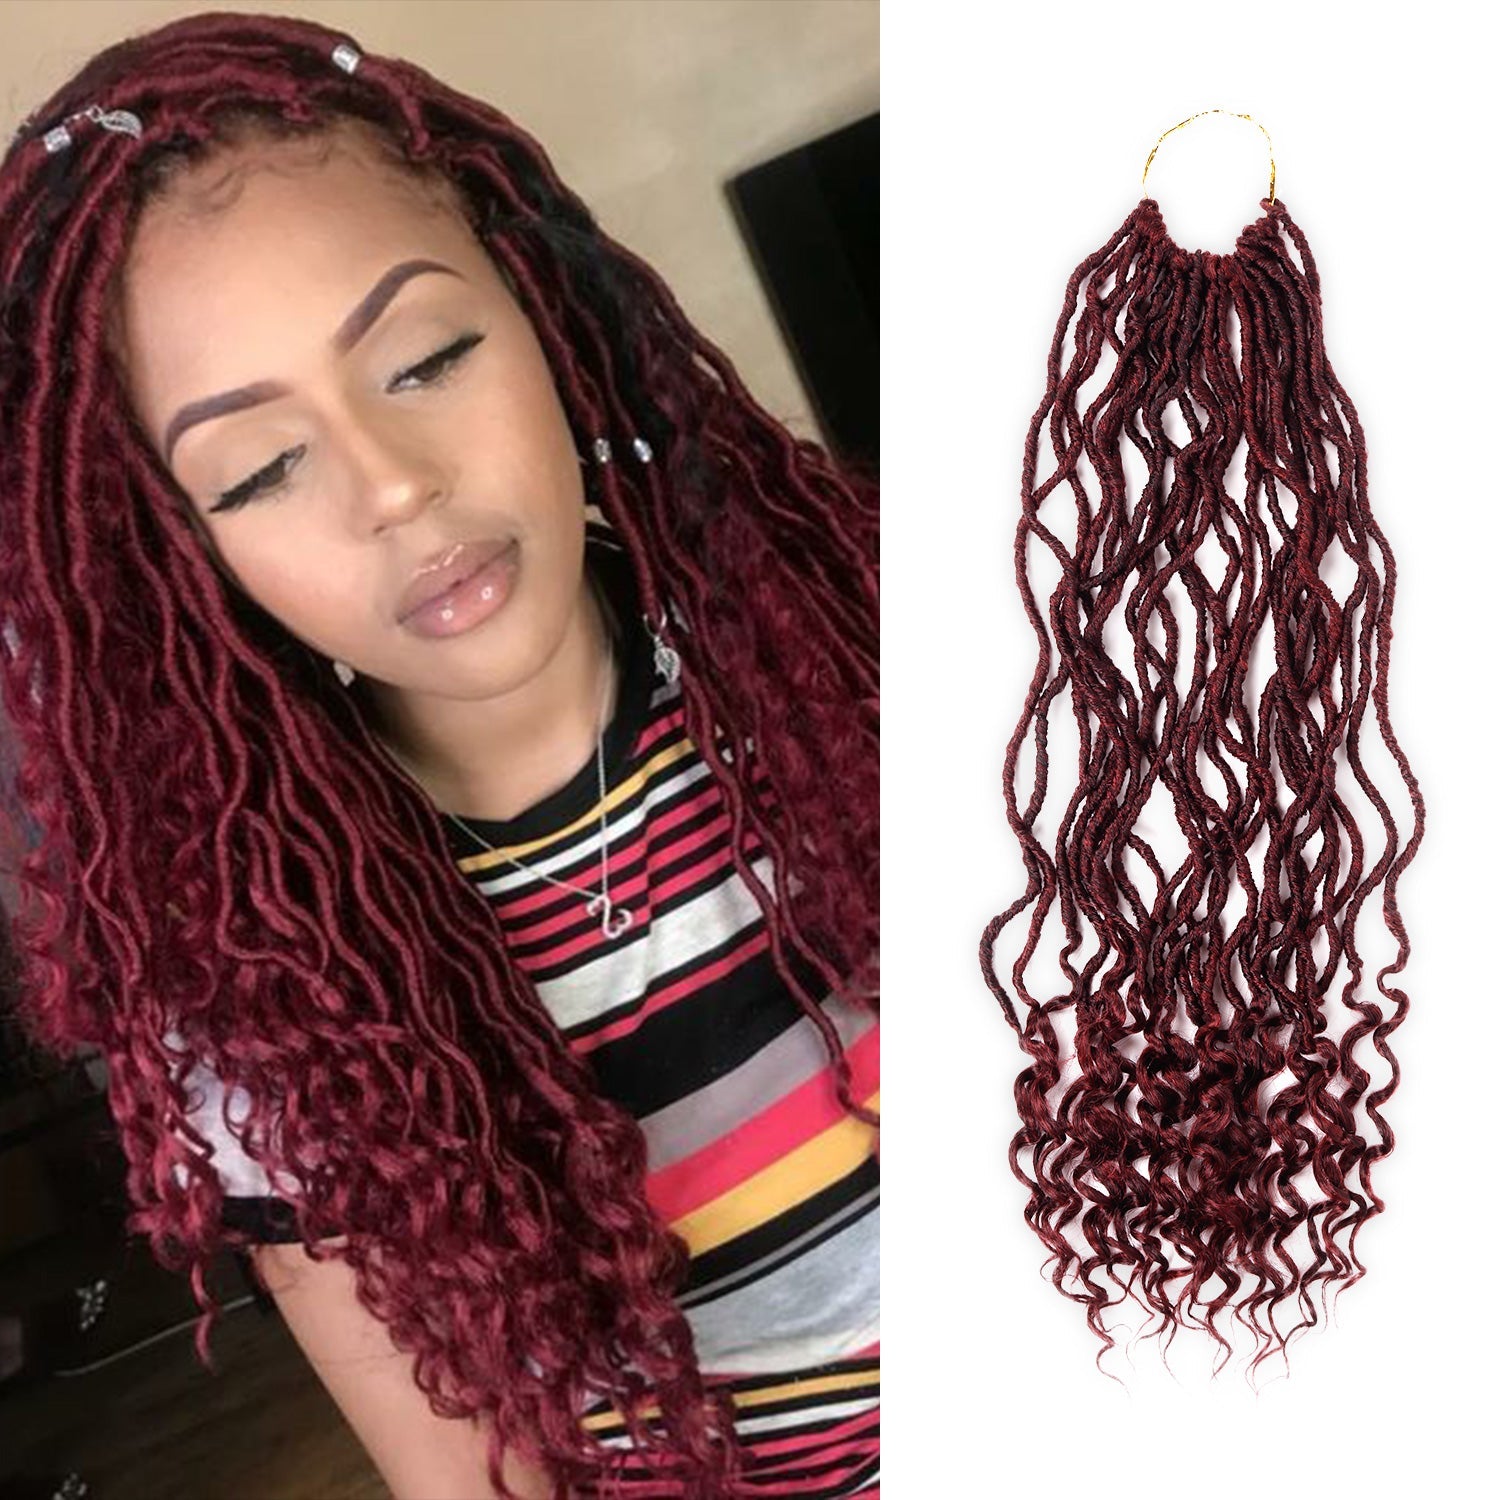 Authentic Synthetic Hair Pre-Looped Distressed Locs Curly Tips 22"